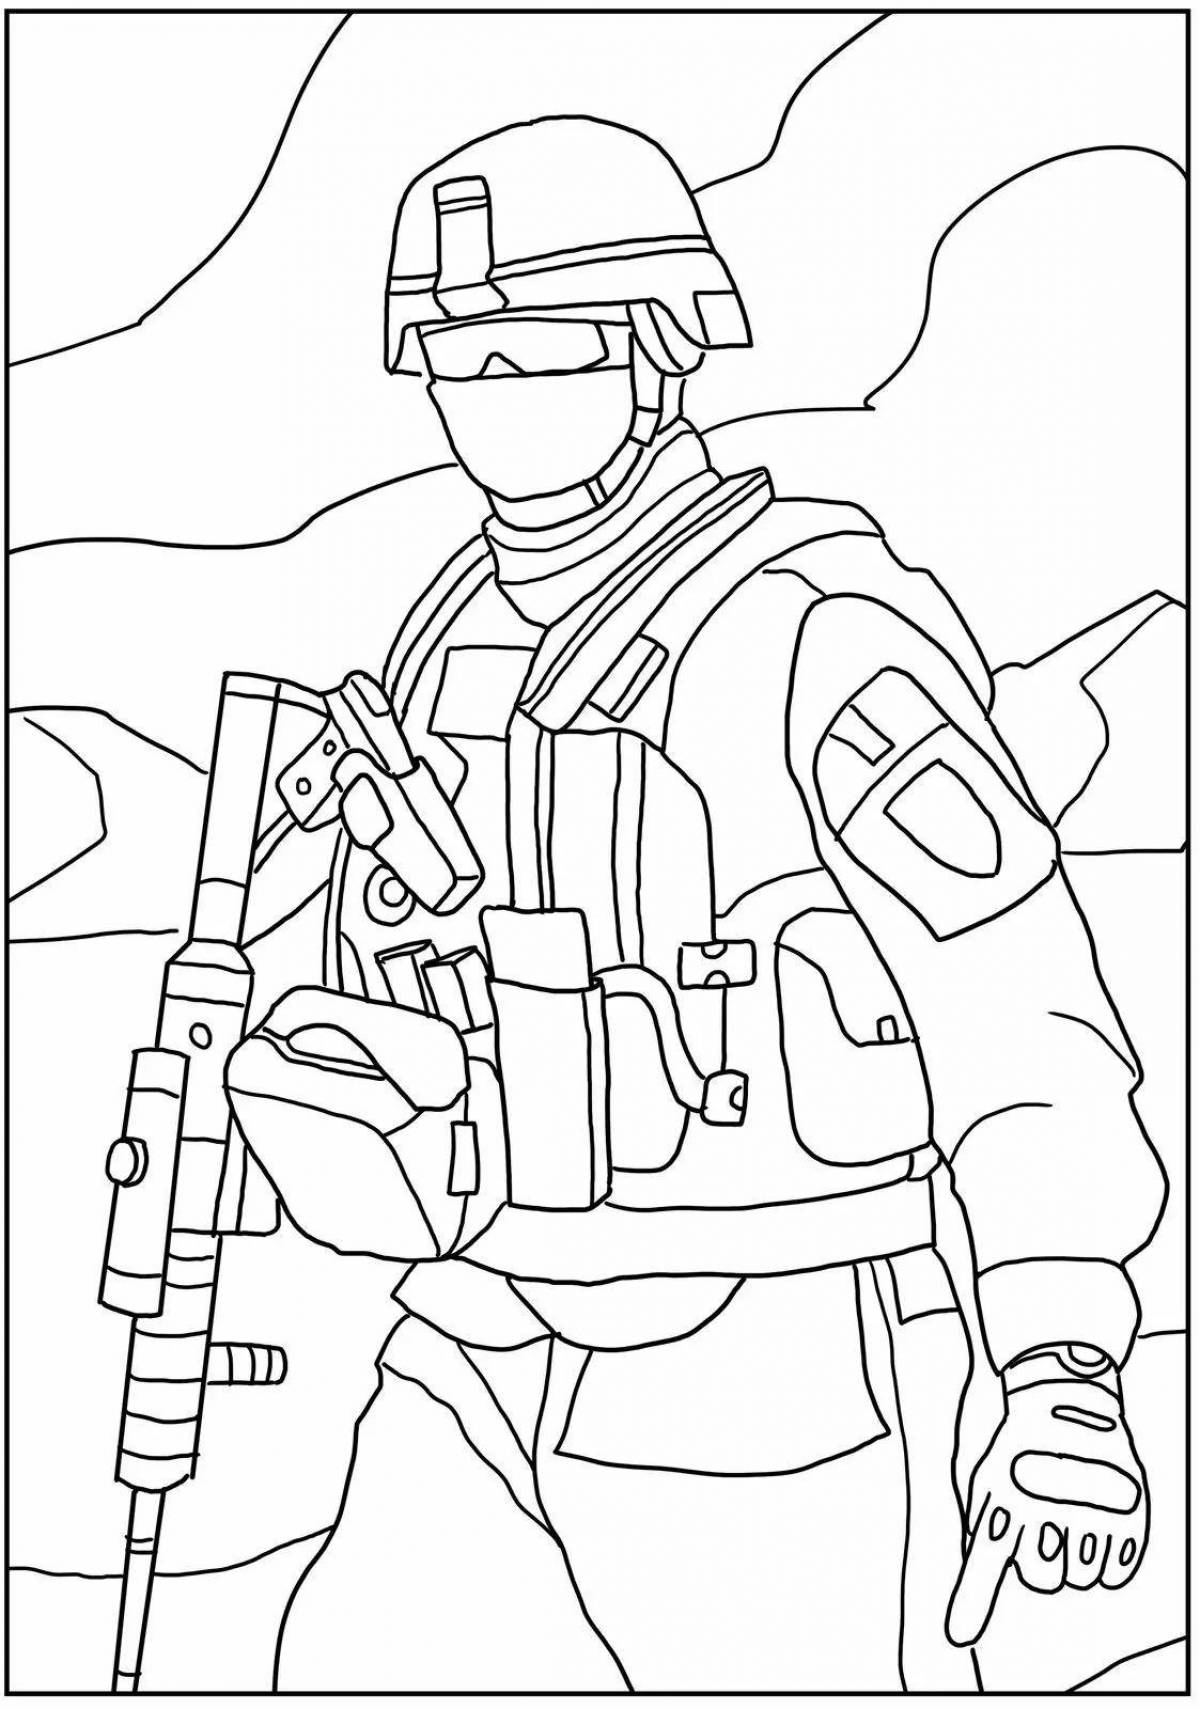 Special forces bright coloring for kids